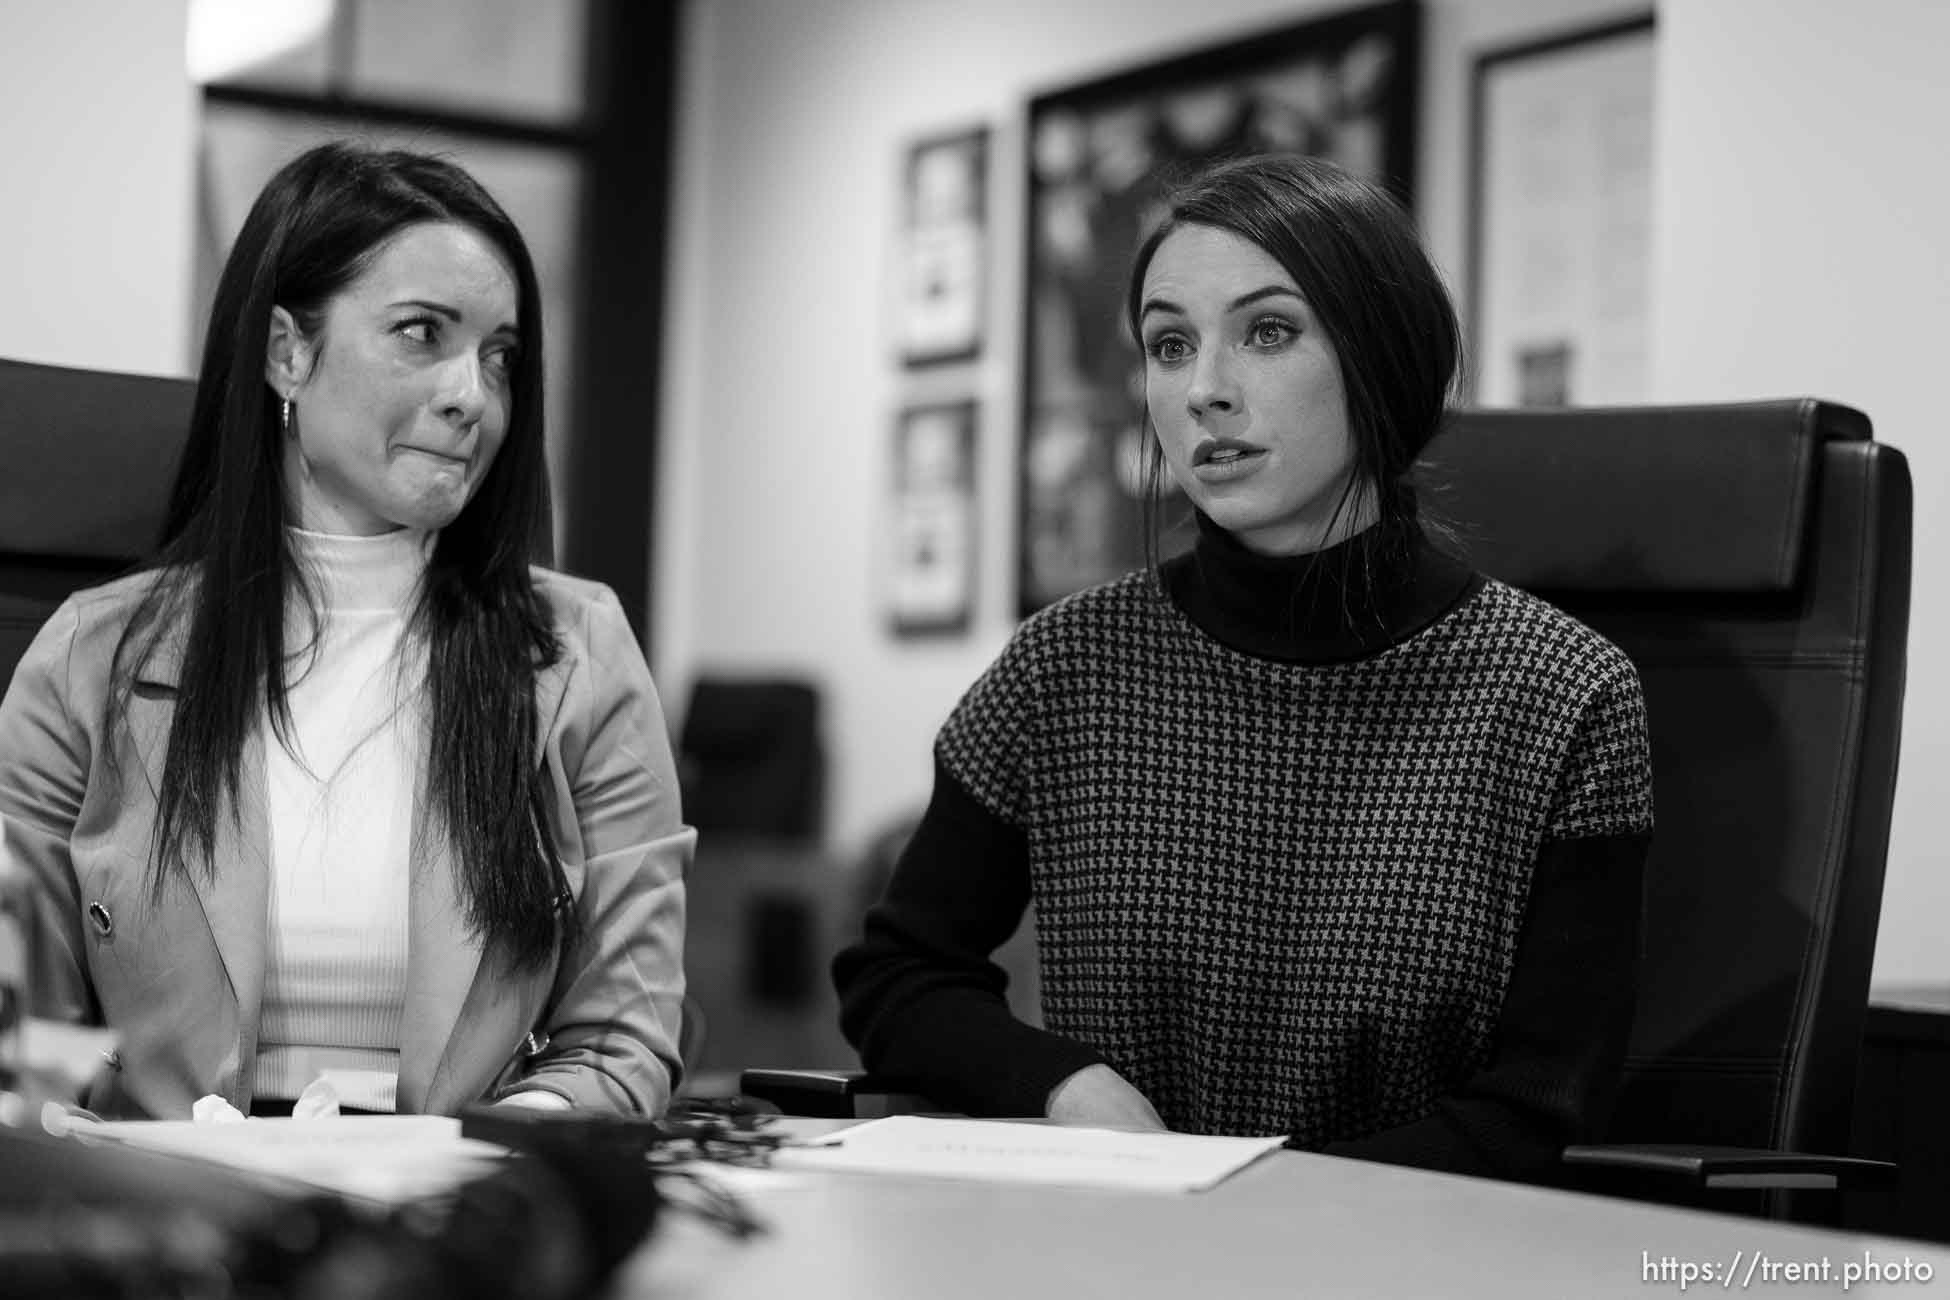 (Trent Nelson  |  The Salt Lake Tribune) The women who are accusing Tim Ballard of sexual misconduct hold a news conference in Salt Lake City on Tuesday, Nov. 21, 2023. From left are Sashleigha (Sasha) Hightower and Mary Hall.